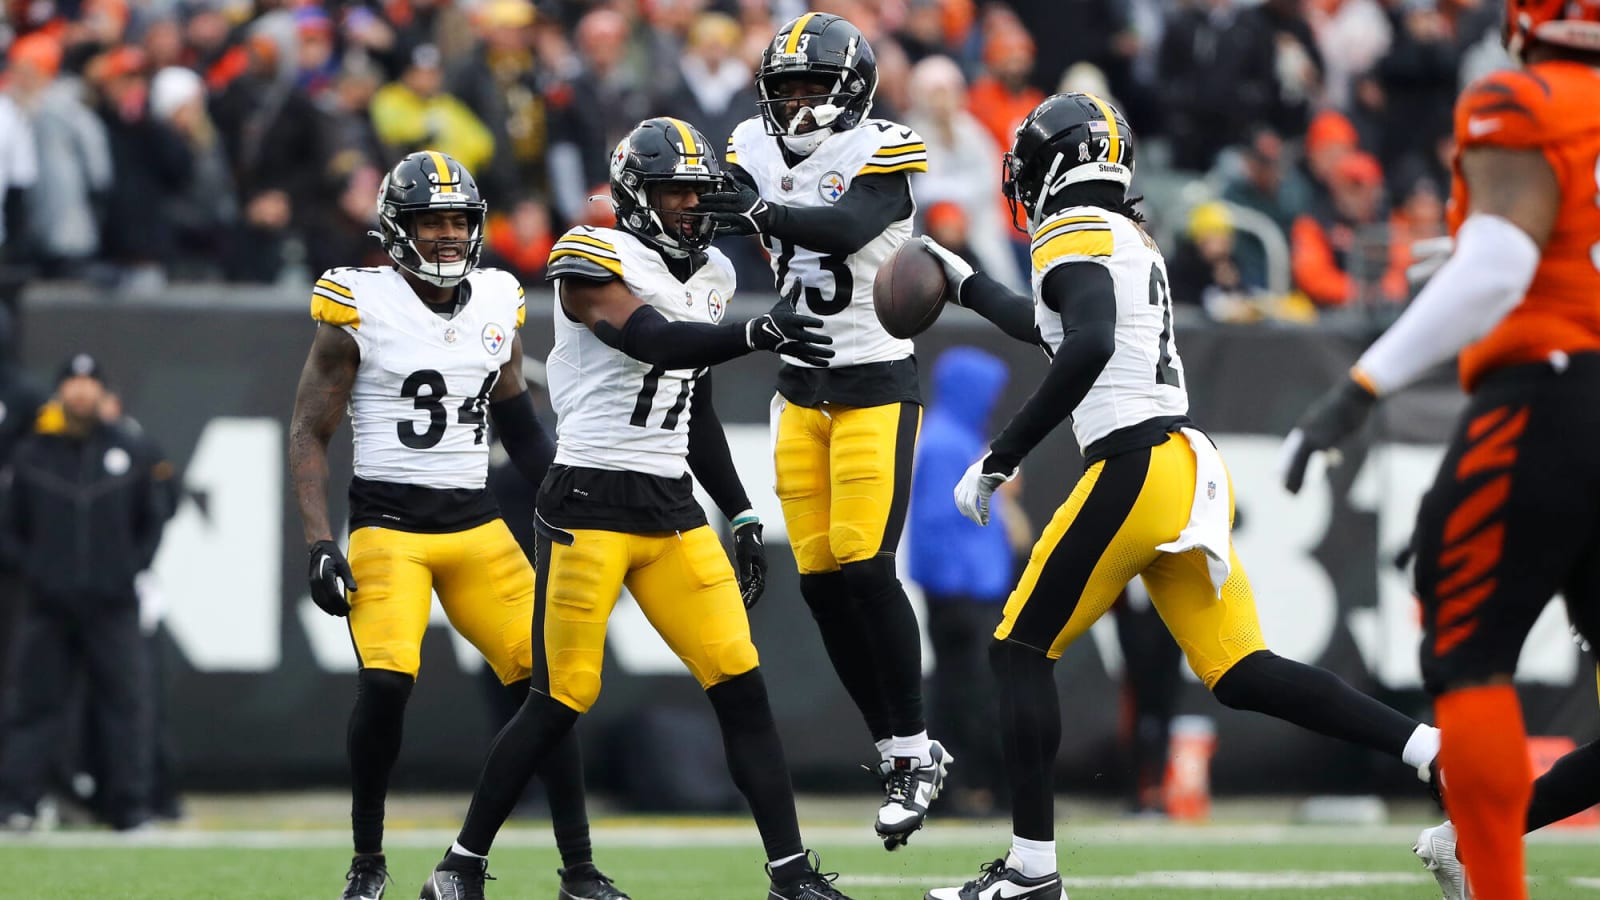 Watch: Steelers’ Thompson snatches career-first INT